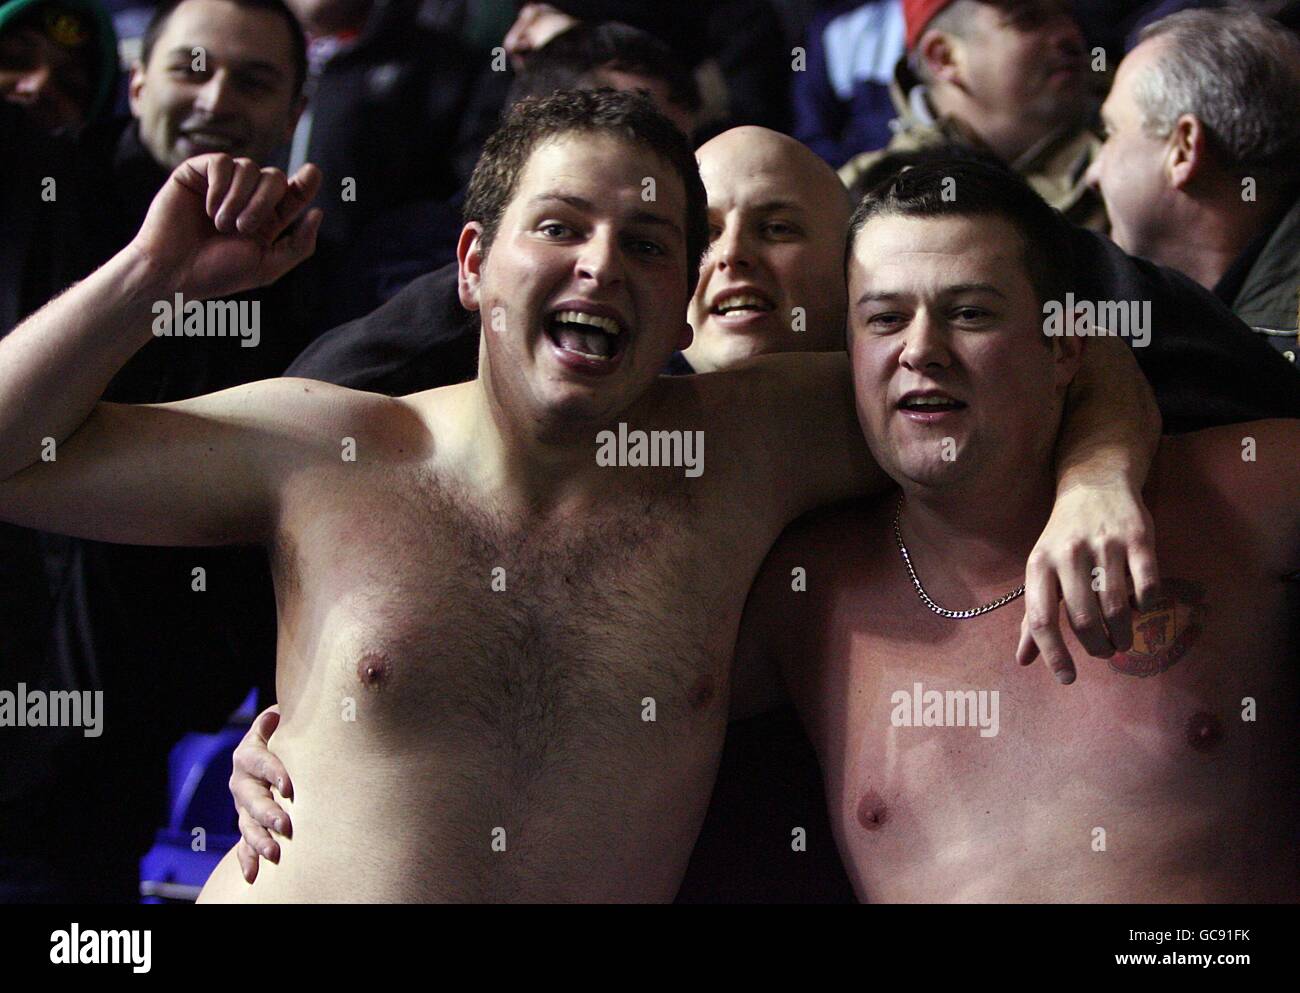 Soccer - Barclays Premier League - Birmingham City v Manchester United - St Andrews Stadium. Despite the freezing conditions Manchester United fans stand up and chant in the stands without any tops on. Stock Photo